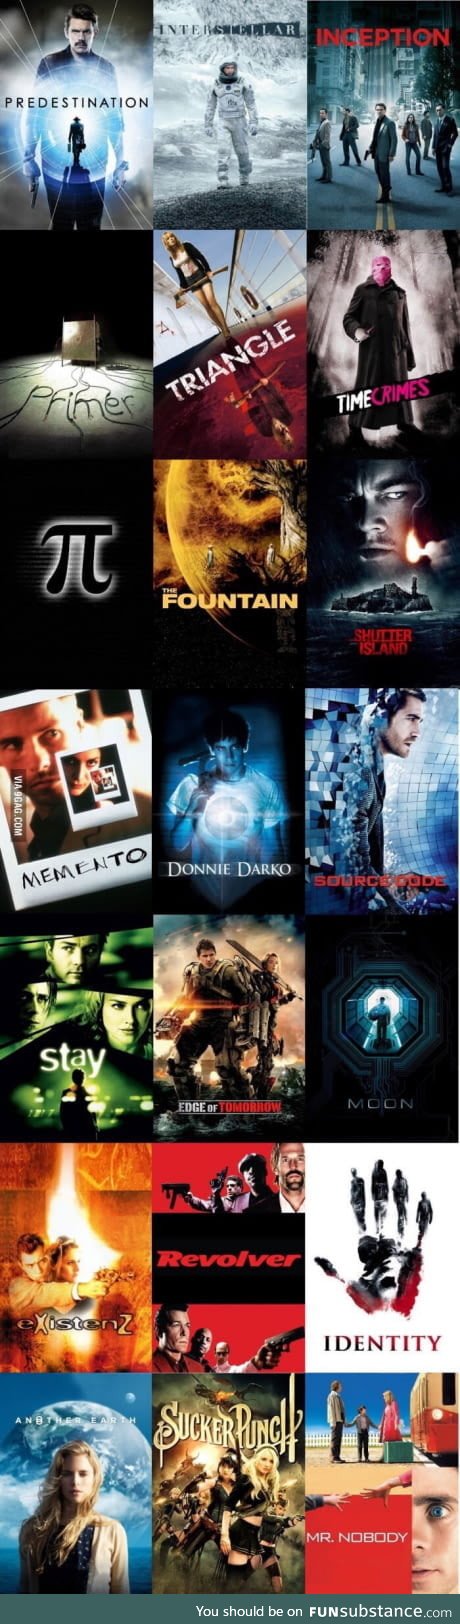 Good collection of movies